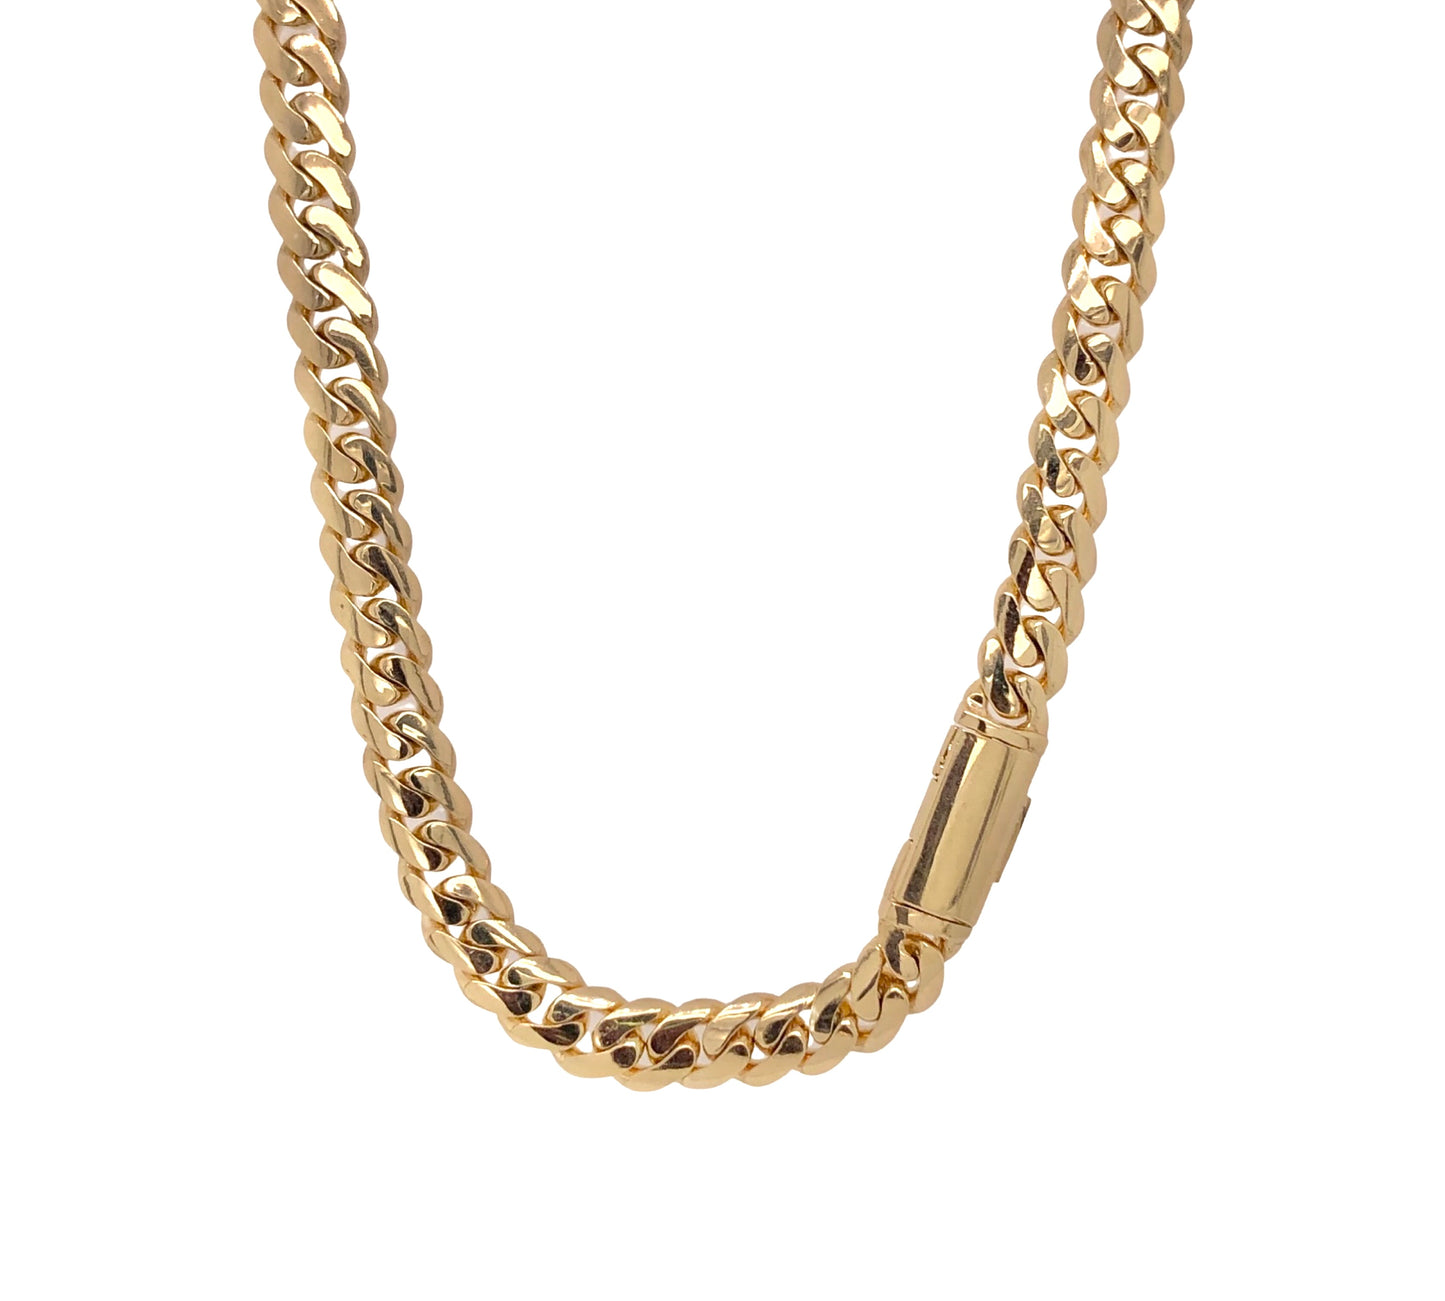 10k solid yellow gold Miami Cuban chain with open box lock 